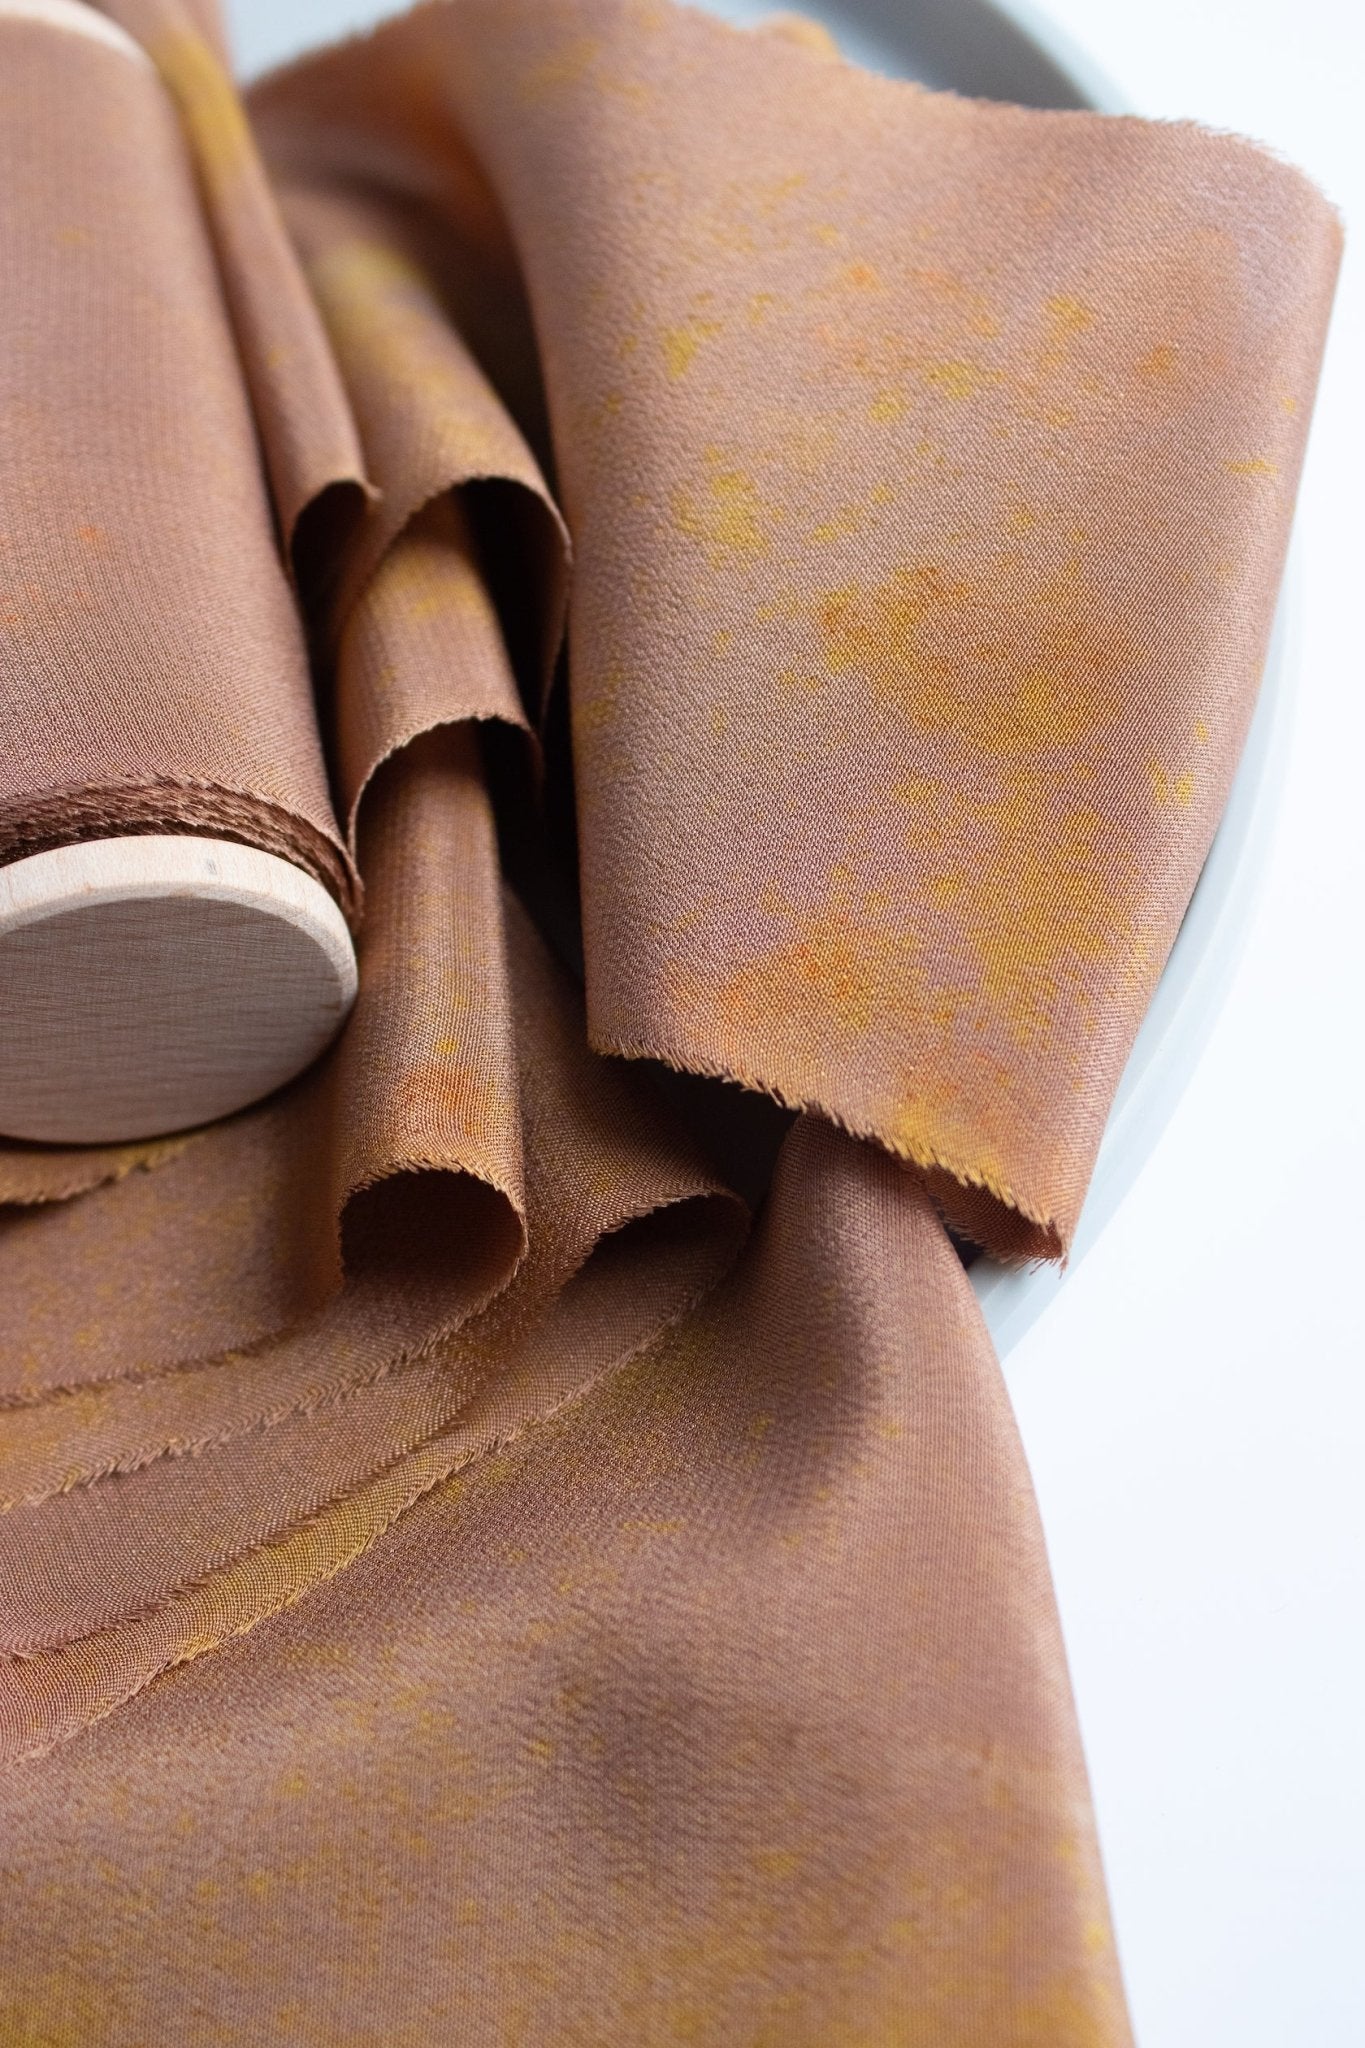 Load image into Gallery viewer, Limited Edition Eco Print #6 Crepe de Chine Silk Ribbon - Brown - The Lesser Bear
